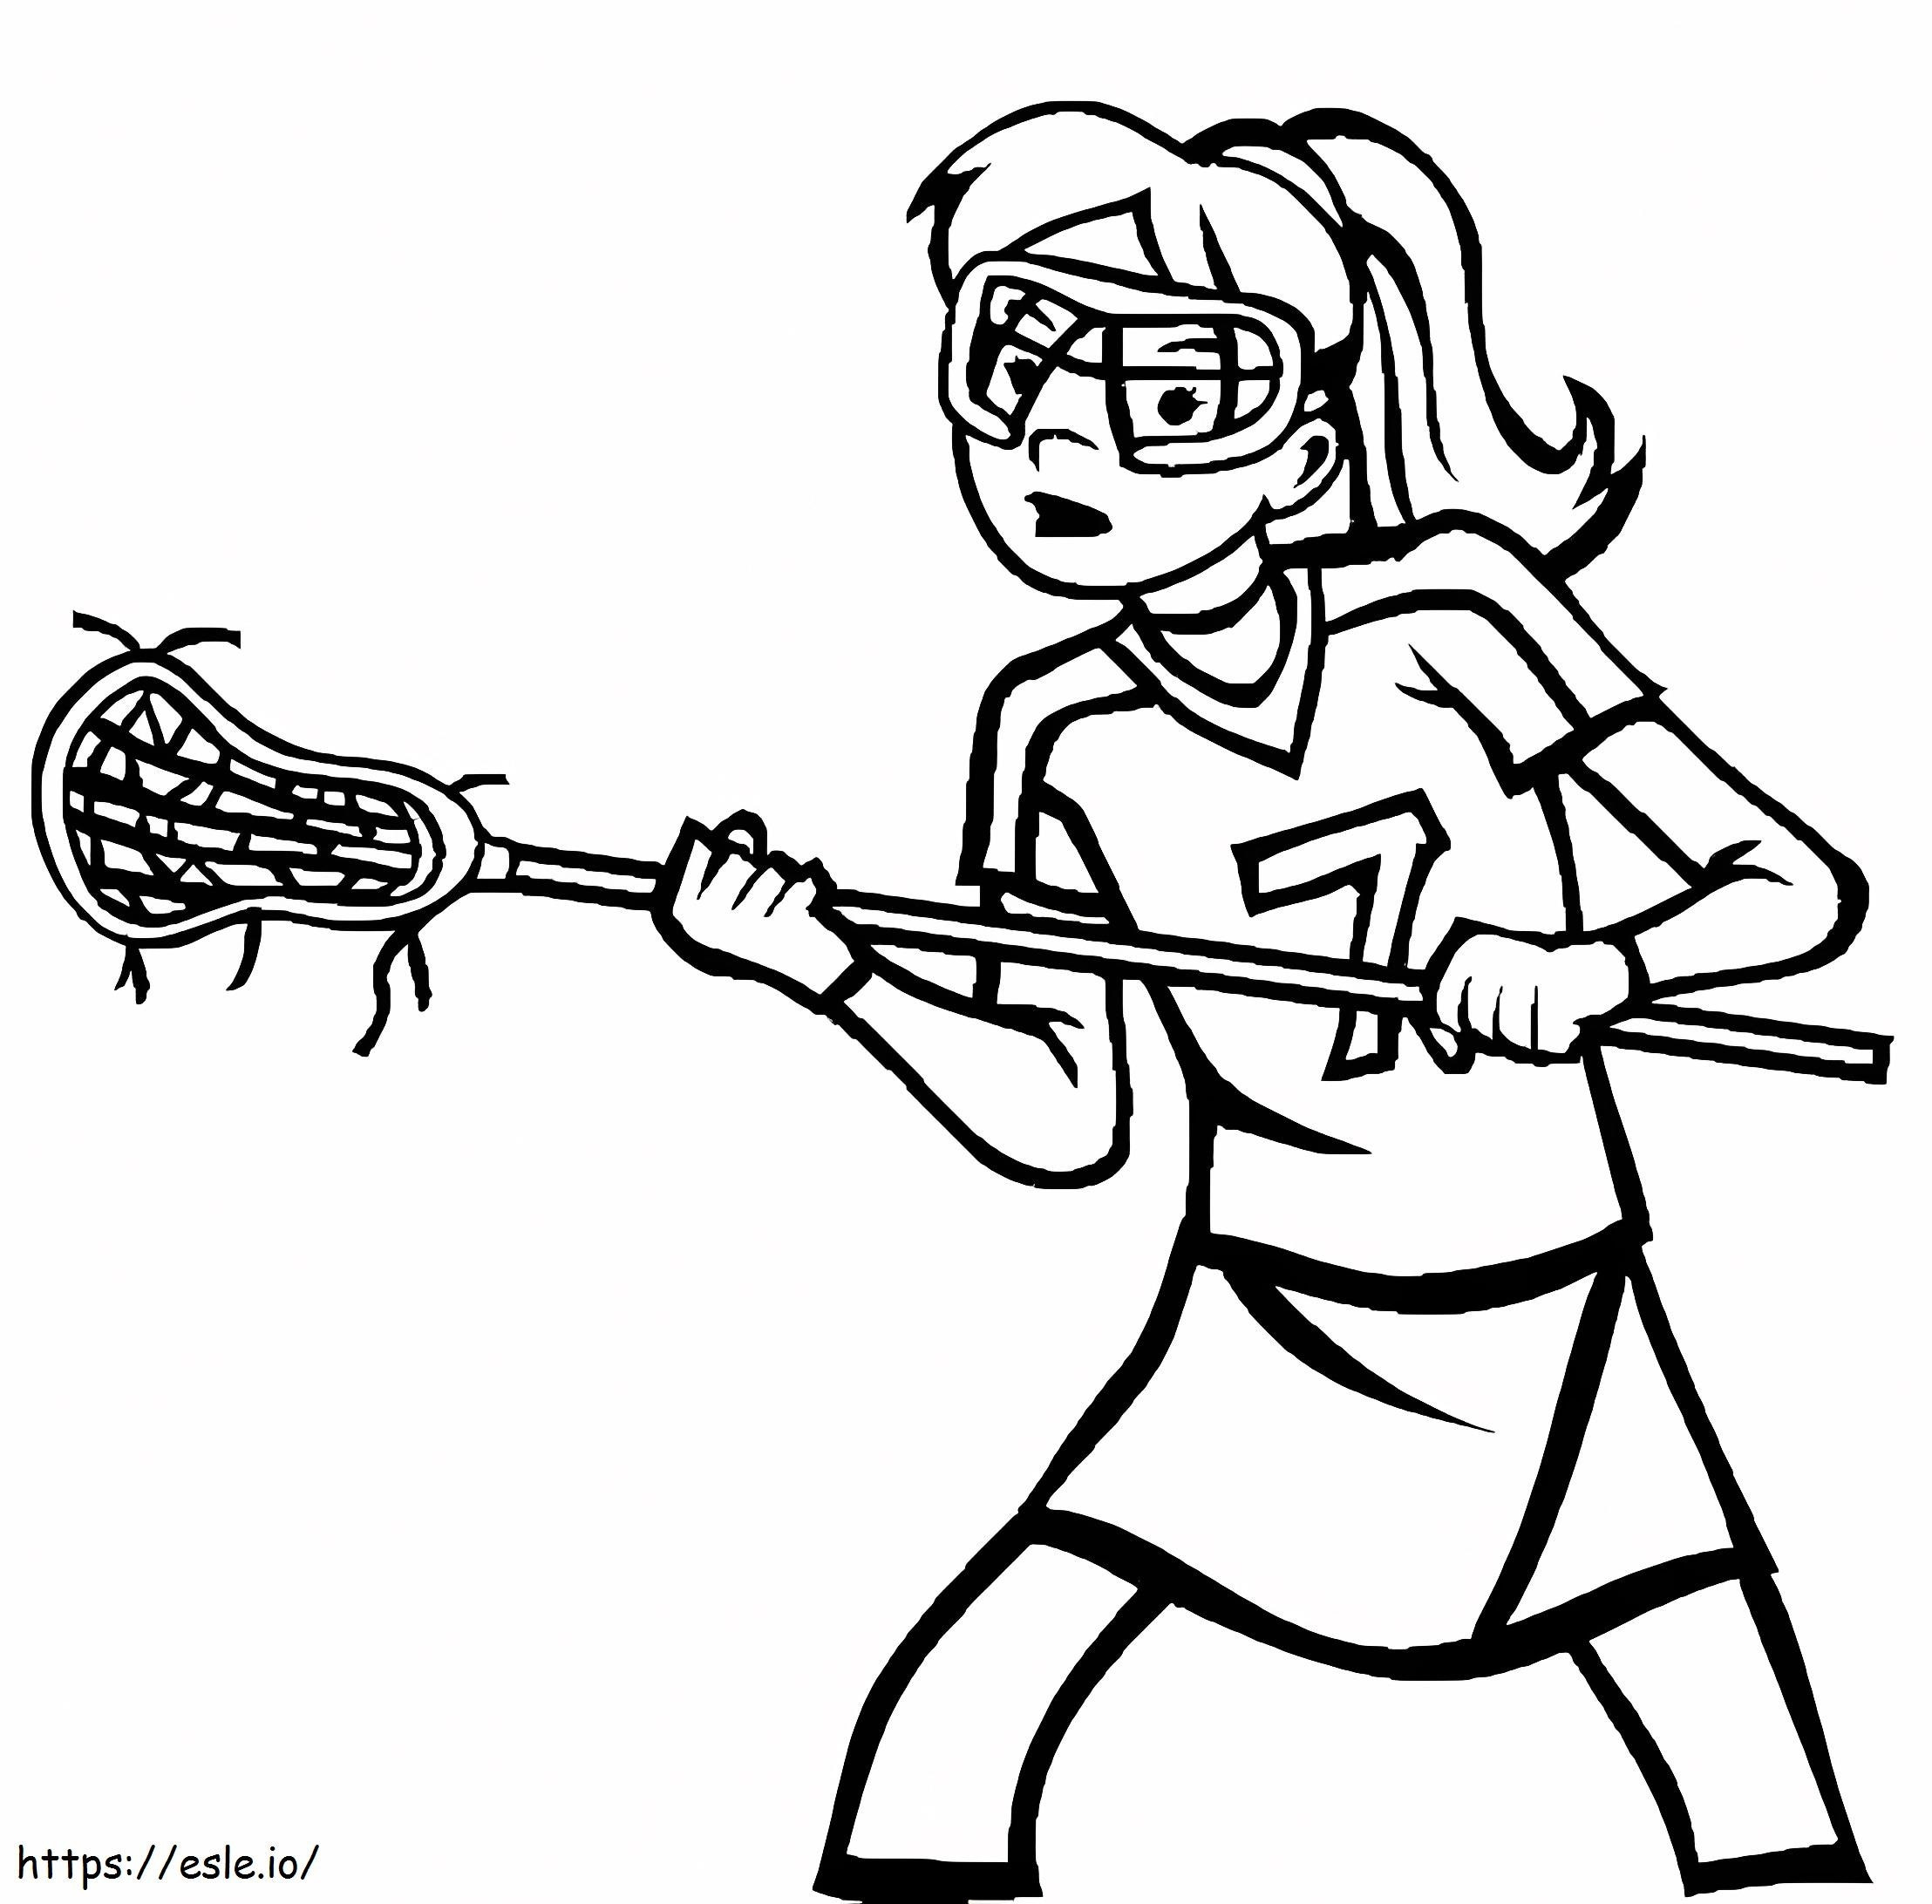 Drawing Girl Playing Lacrosse coloring page